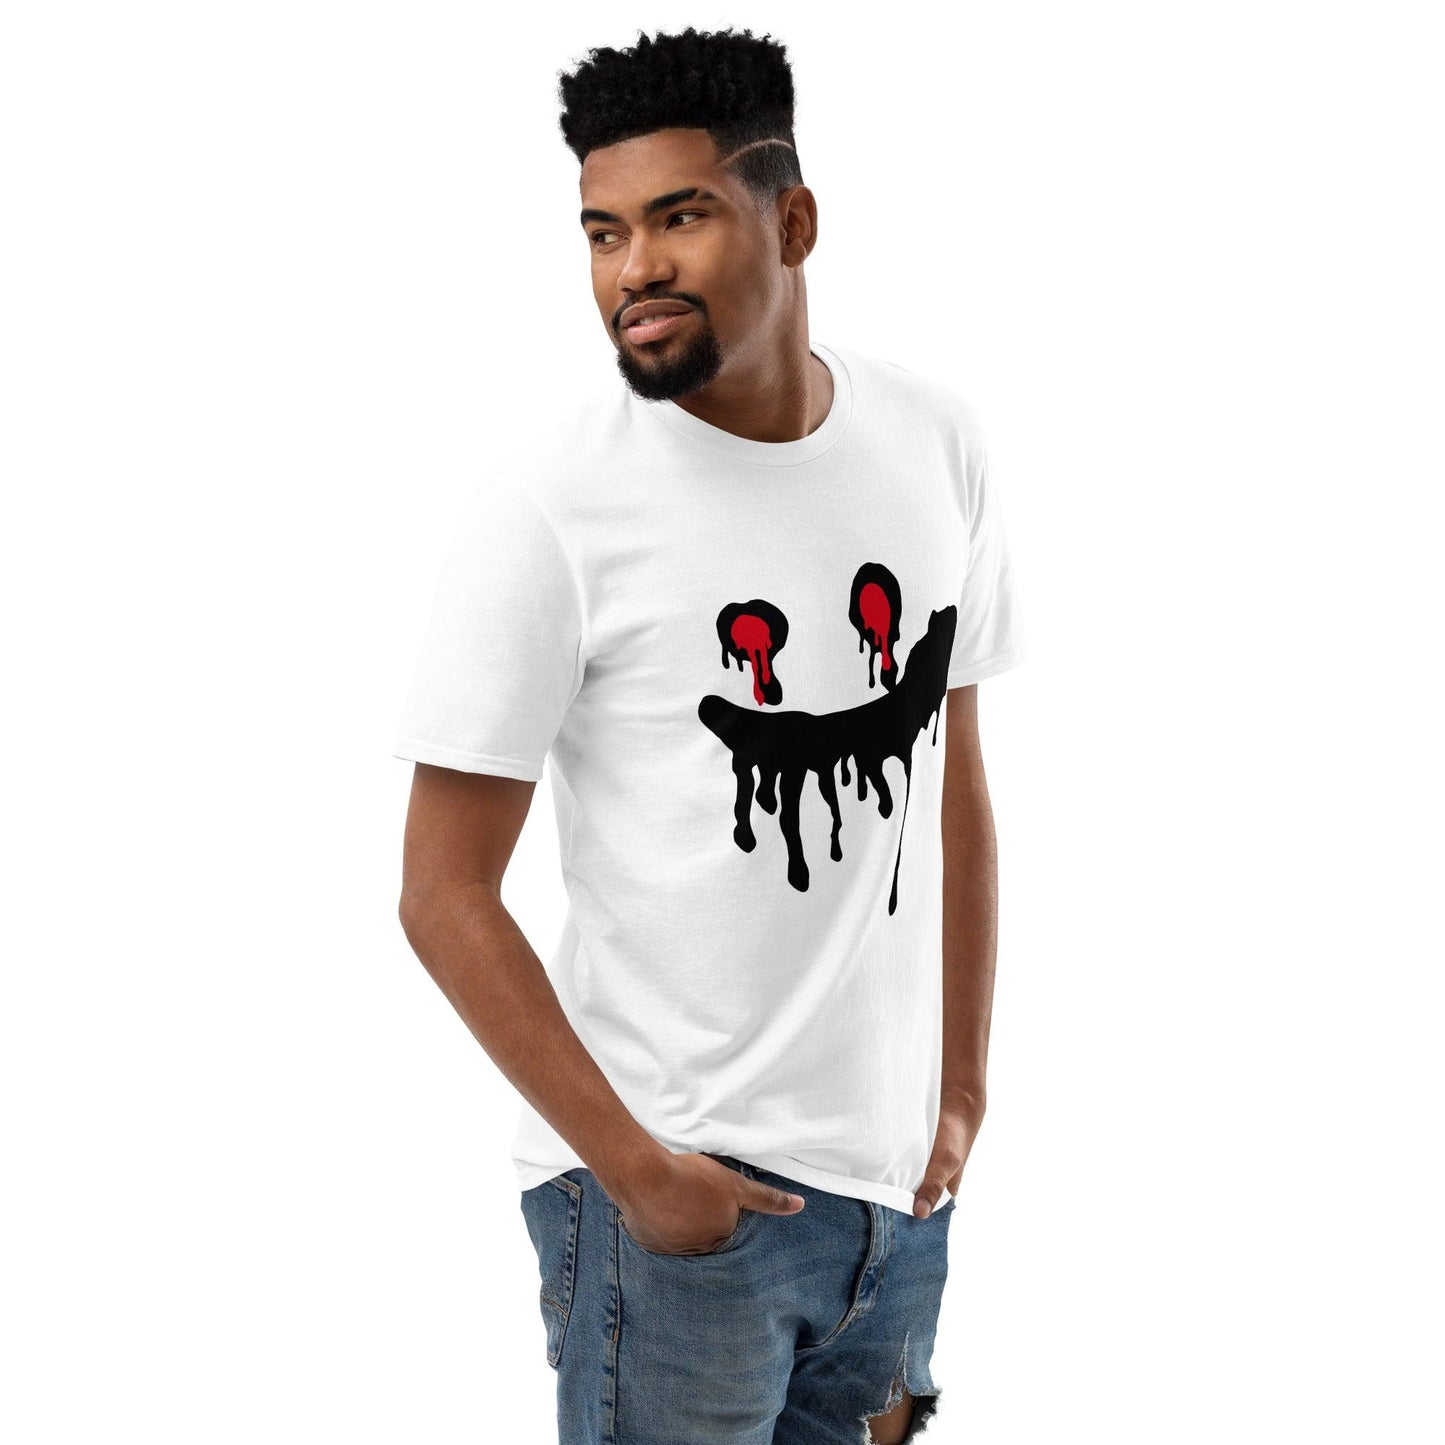 Freaky Shoes Short-Sleeve T-Shirt - Freaky Shoes®